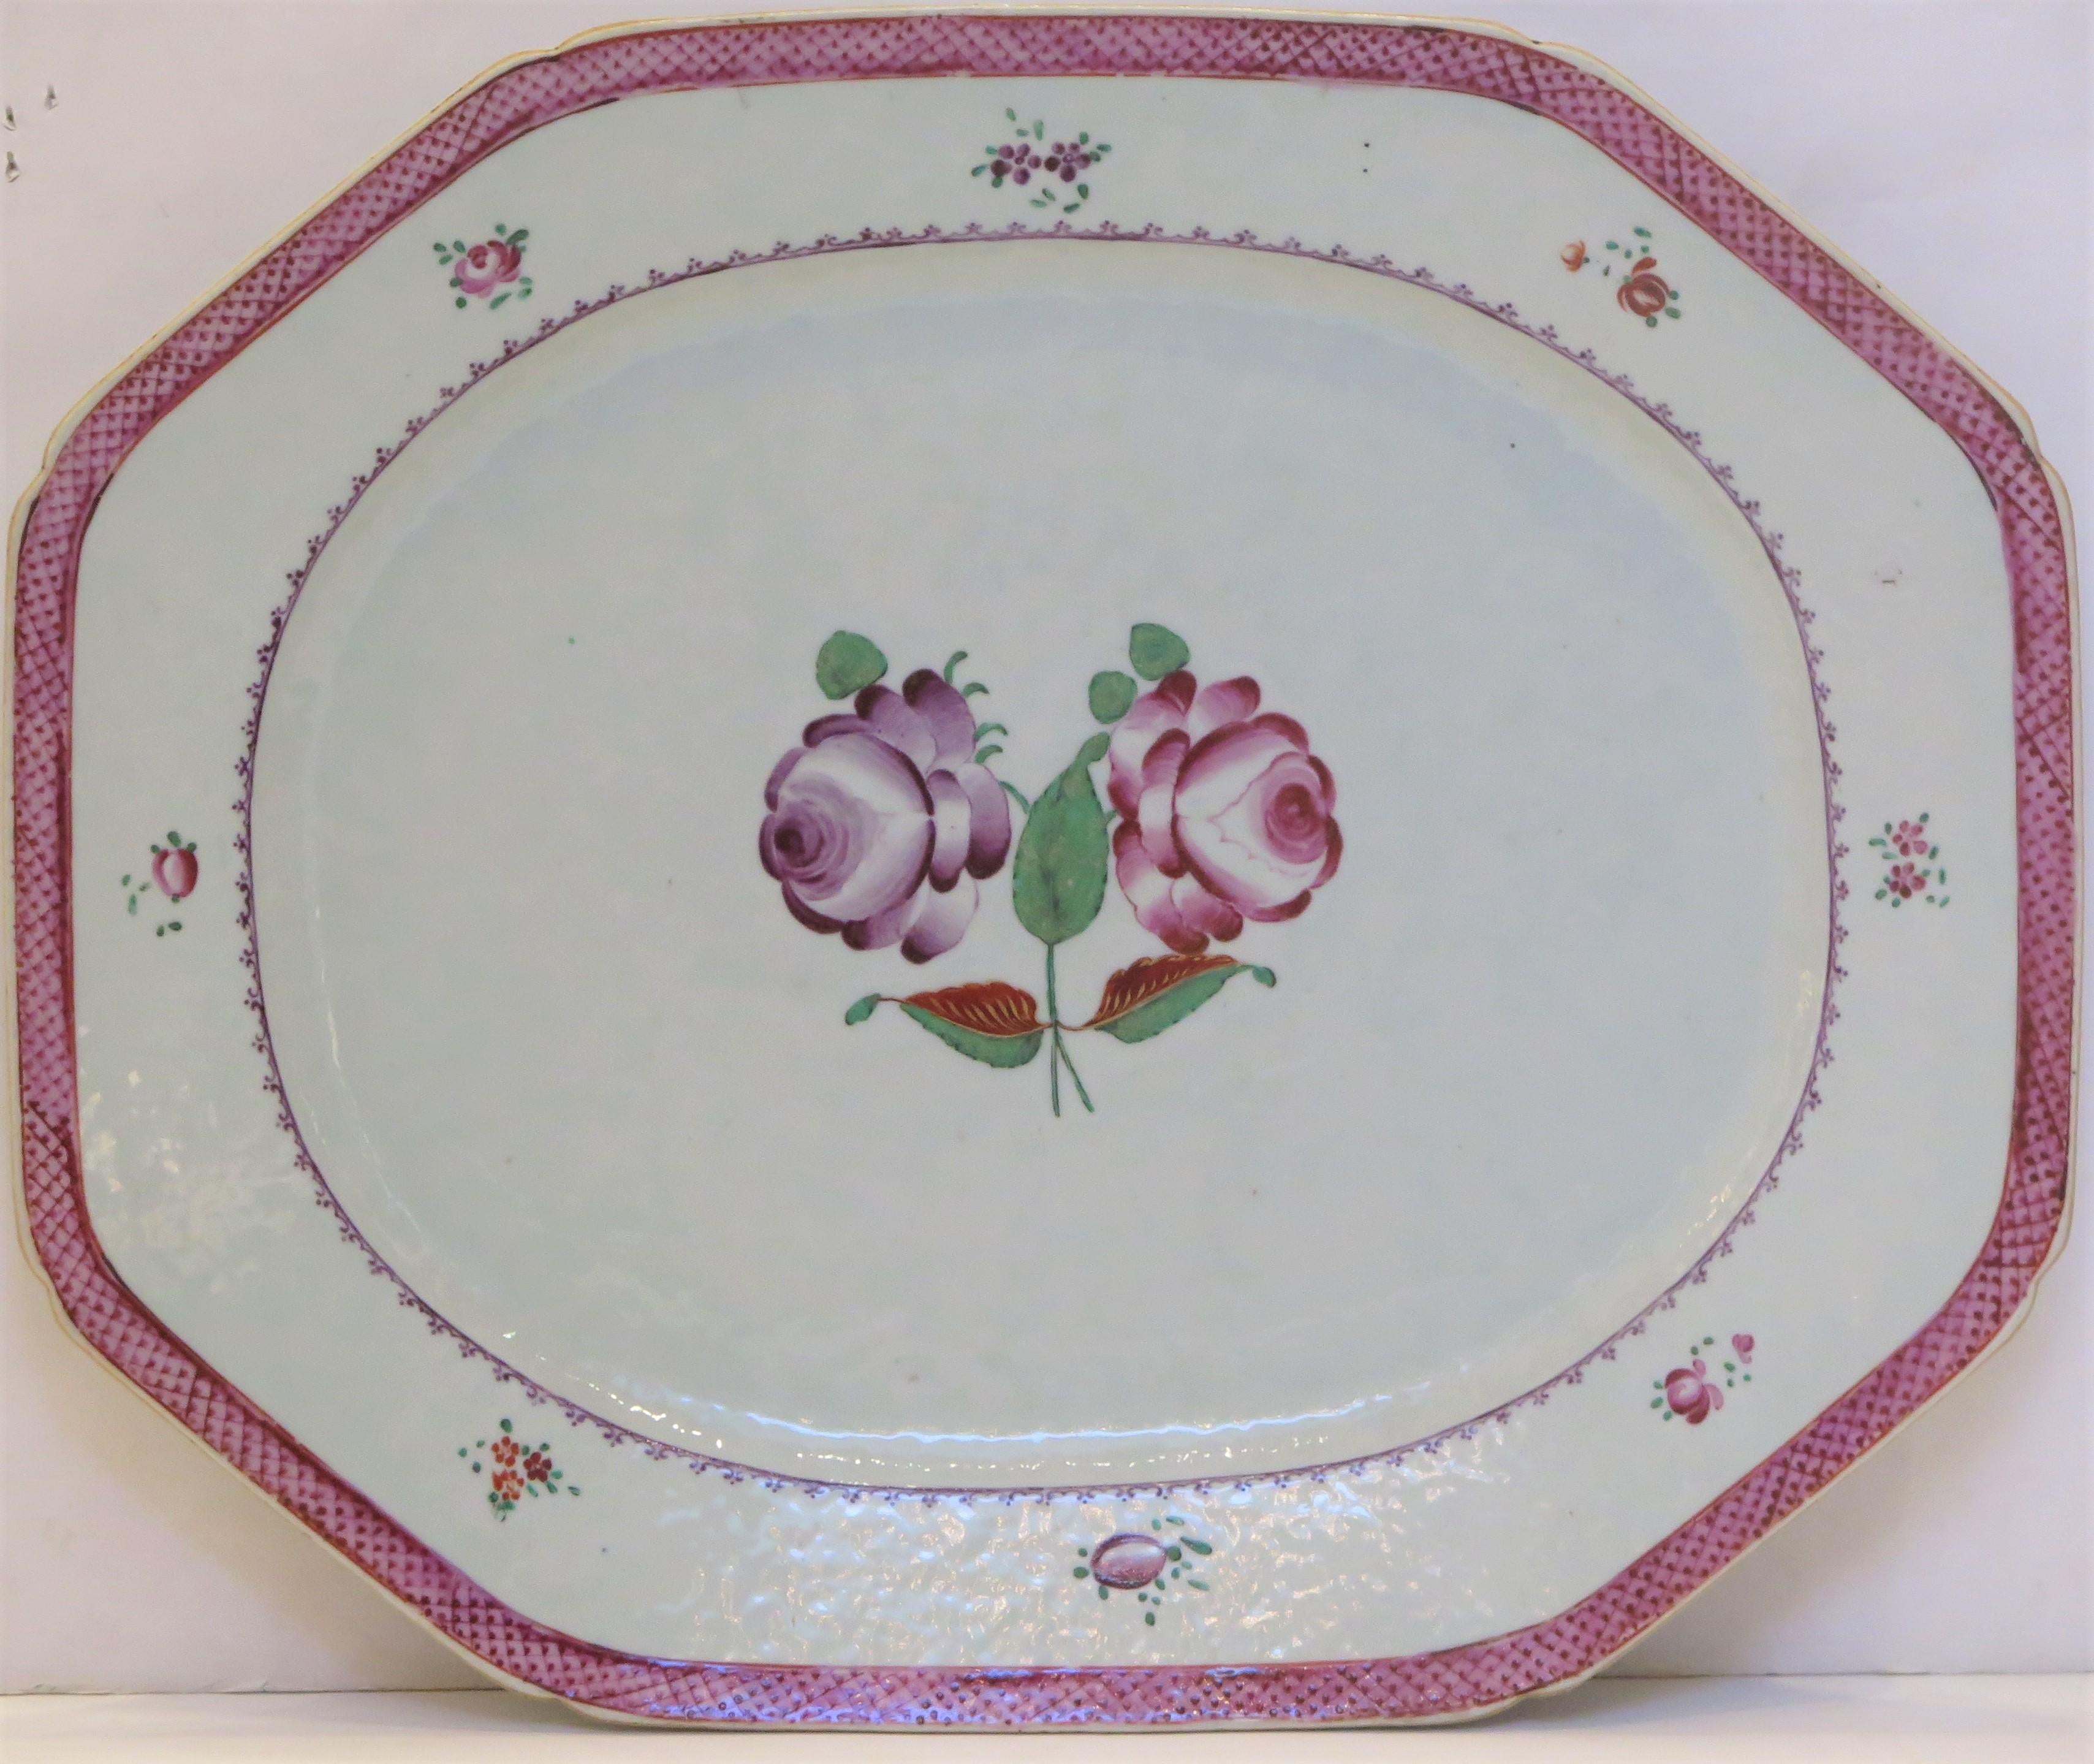 SINGLE Chinese Export Platter / Hand-Painted Floral Decoration 5